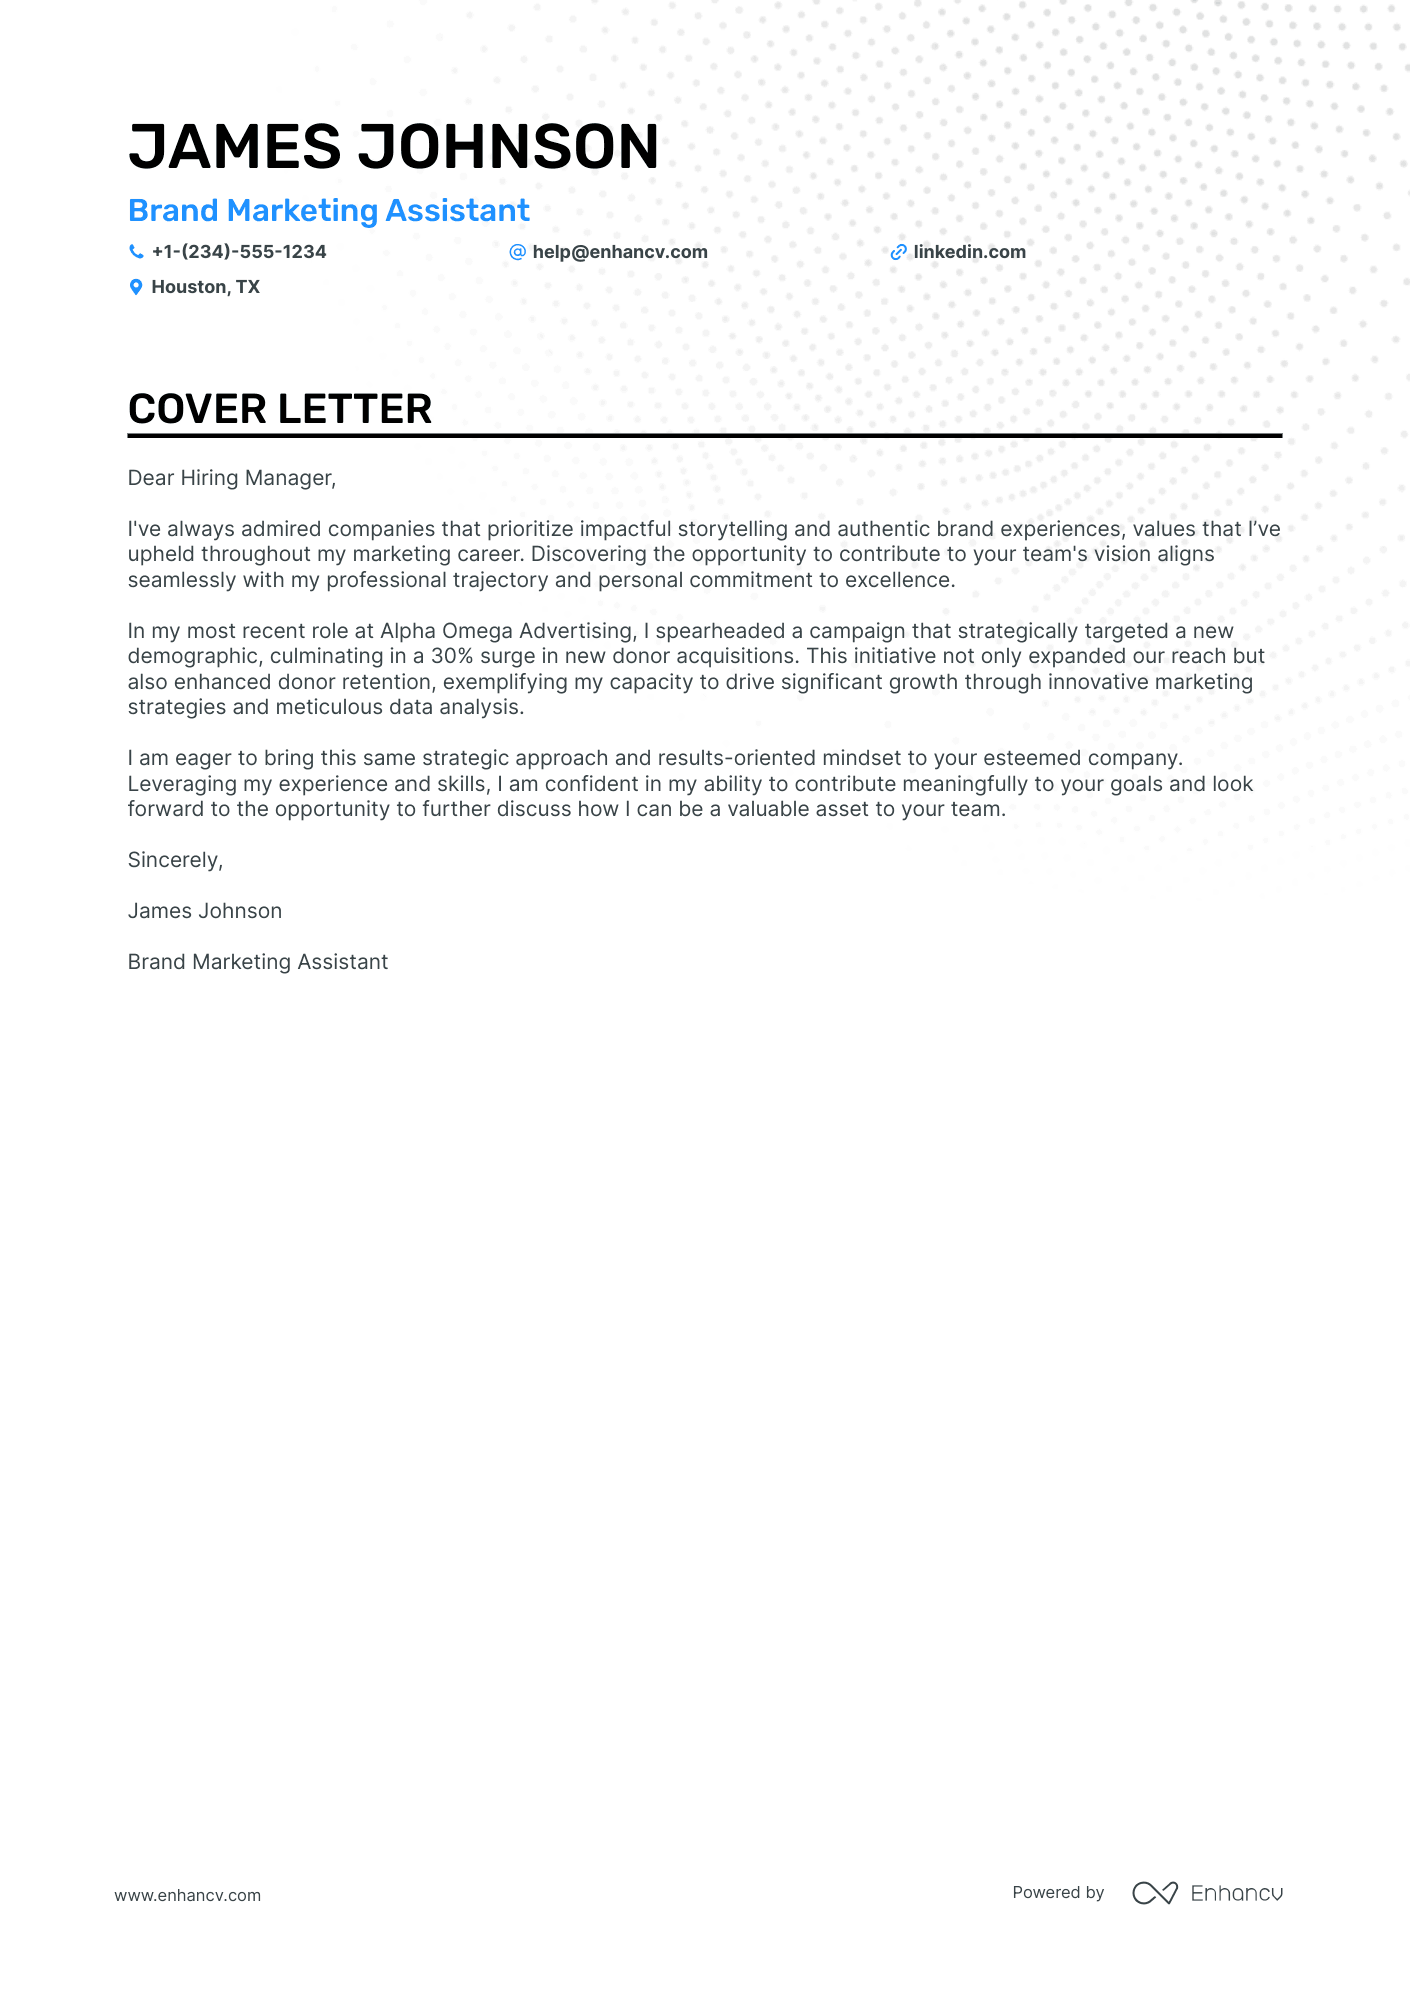 Marketing Assistant cover letter